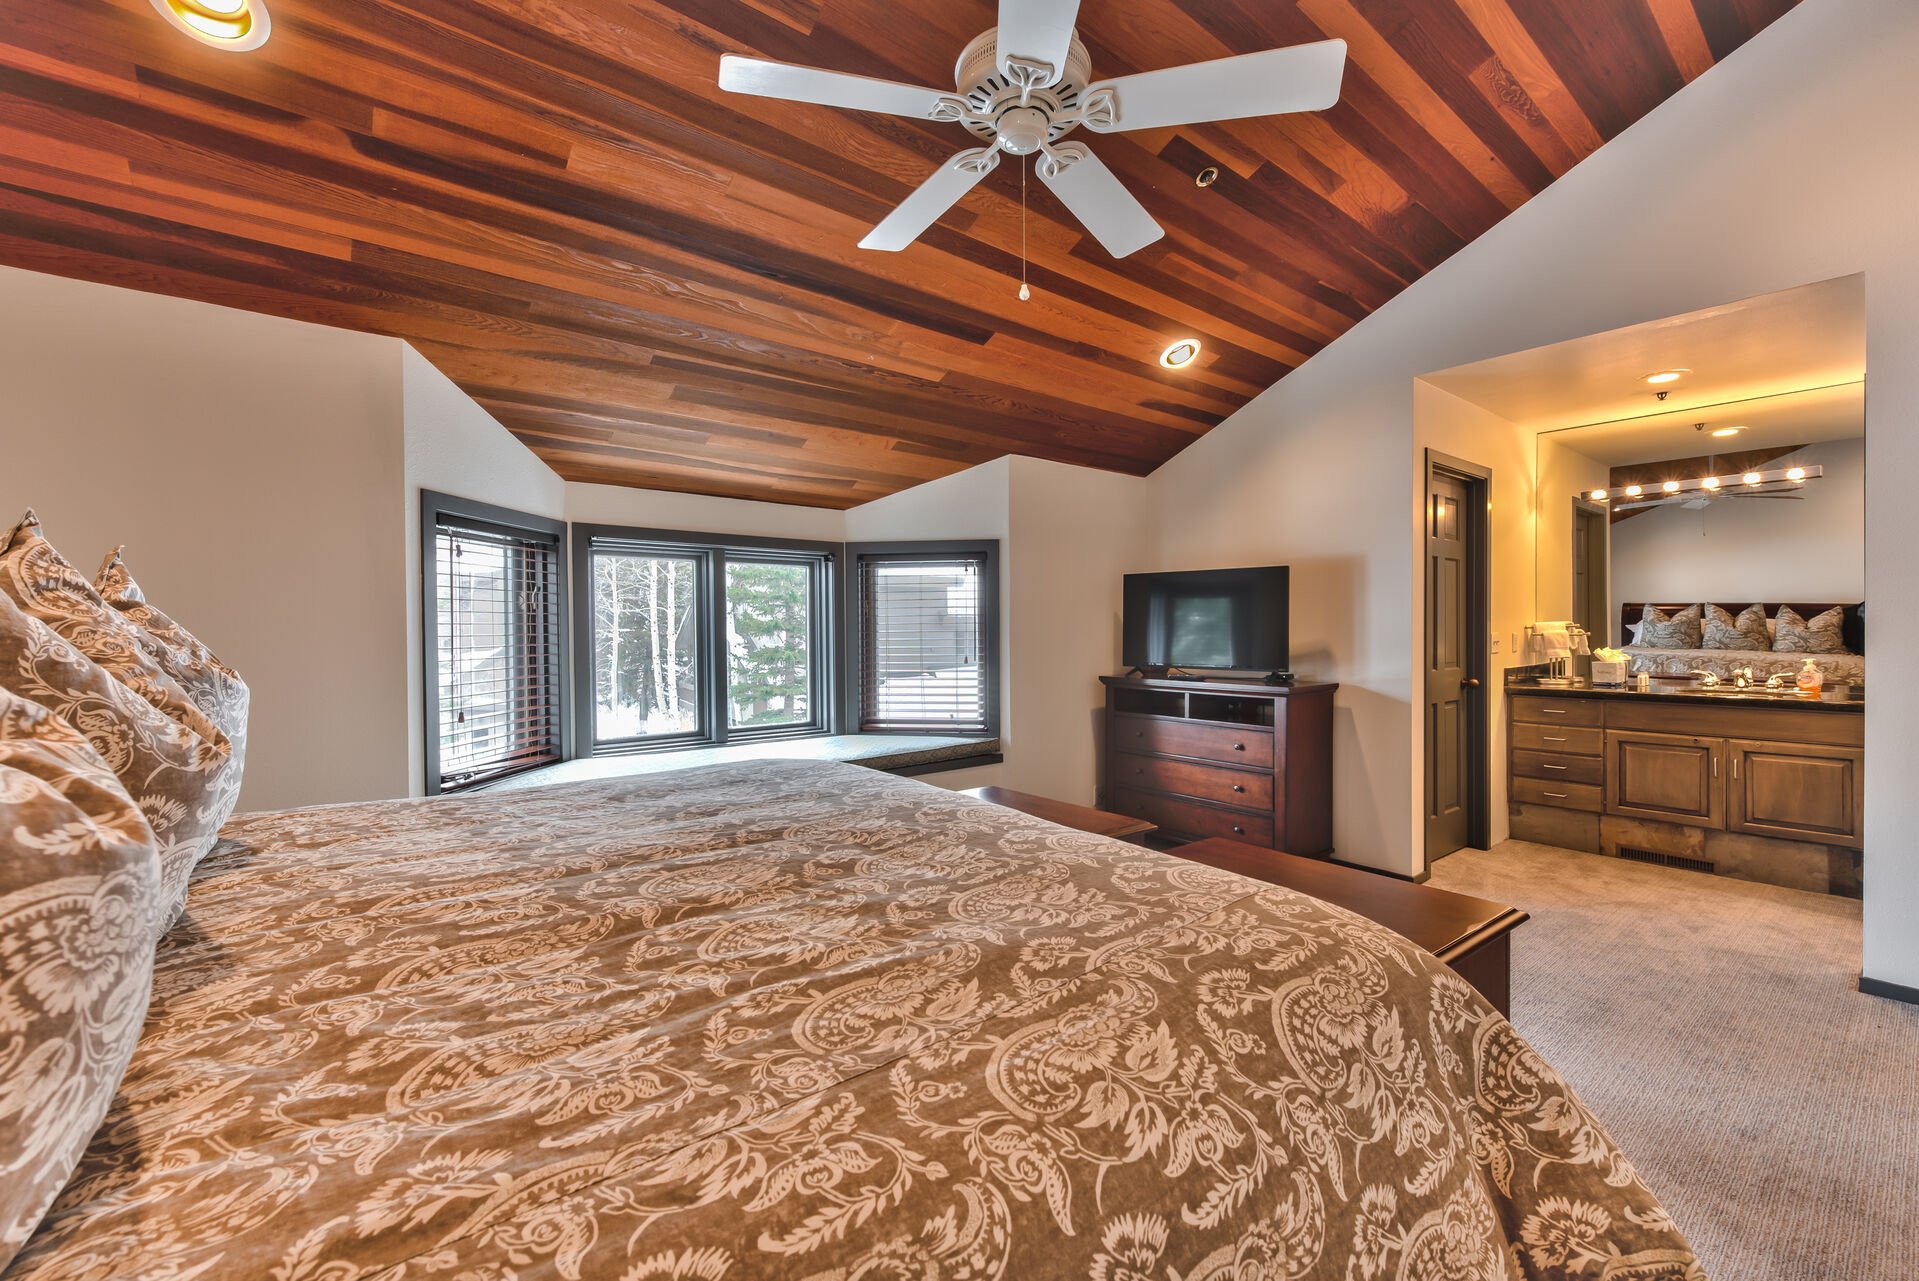 Upper Level Master Bedroom 2 has a King Bed, Window Bench Seating, TV, and Private Bath